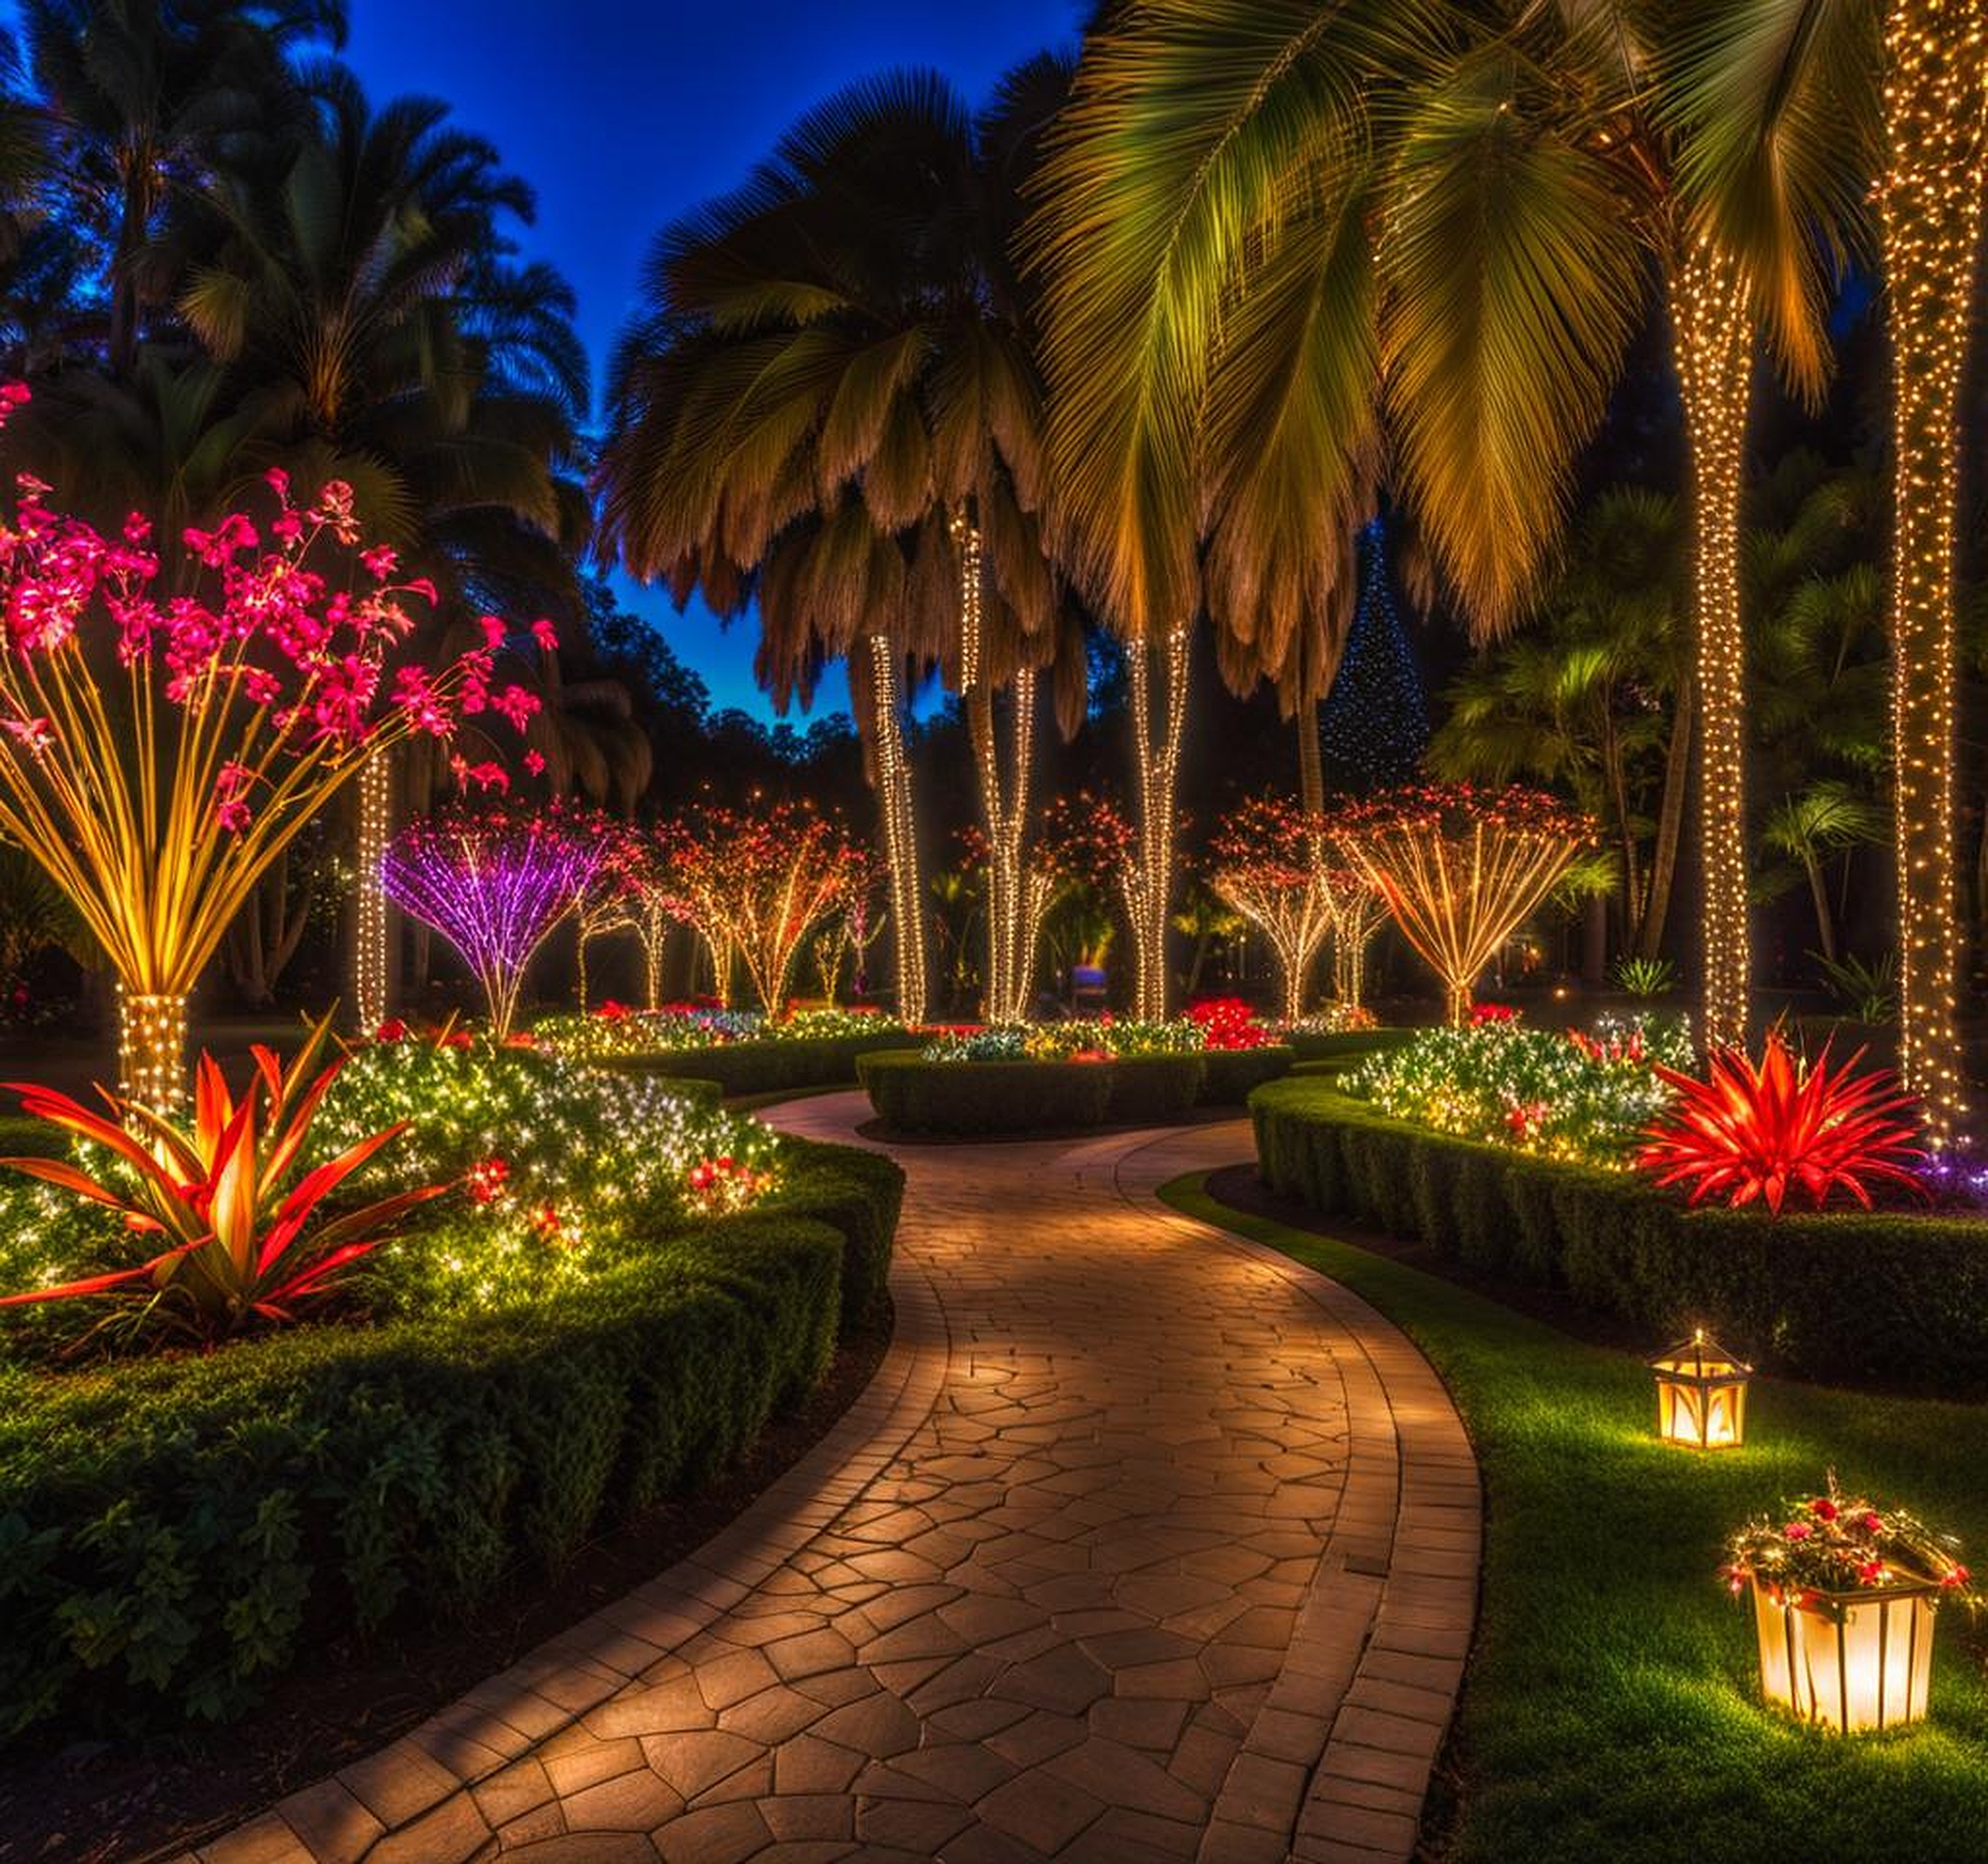 Experience the Enchanting Evening of Night of Lights Pinecrest Gardens